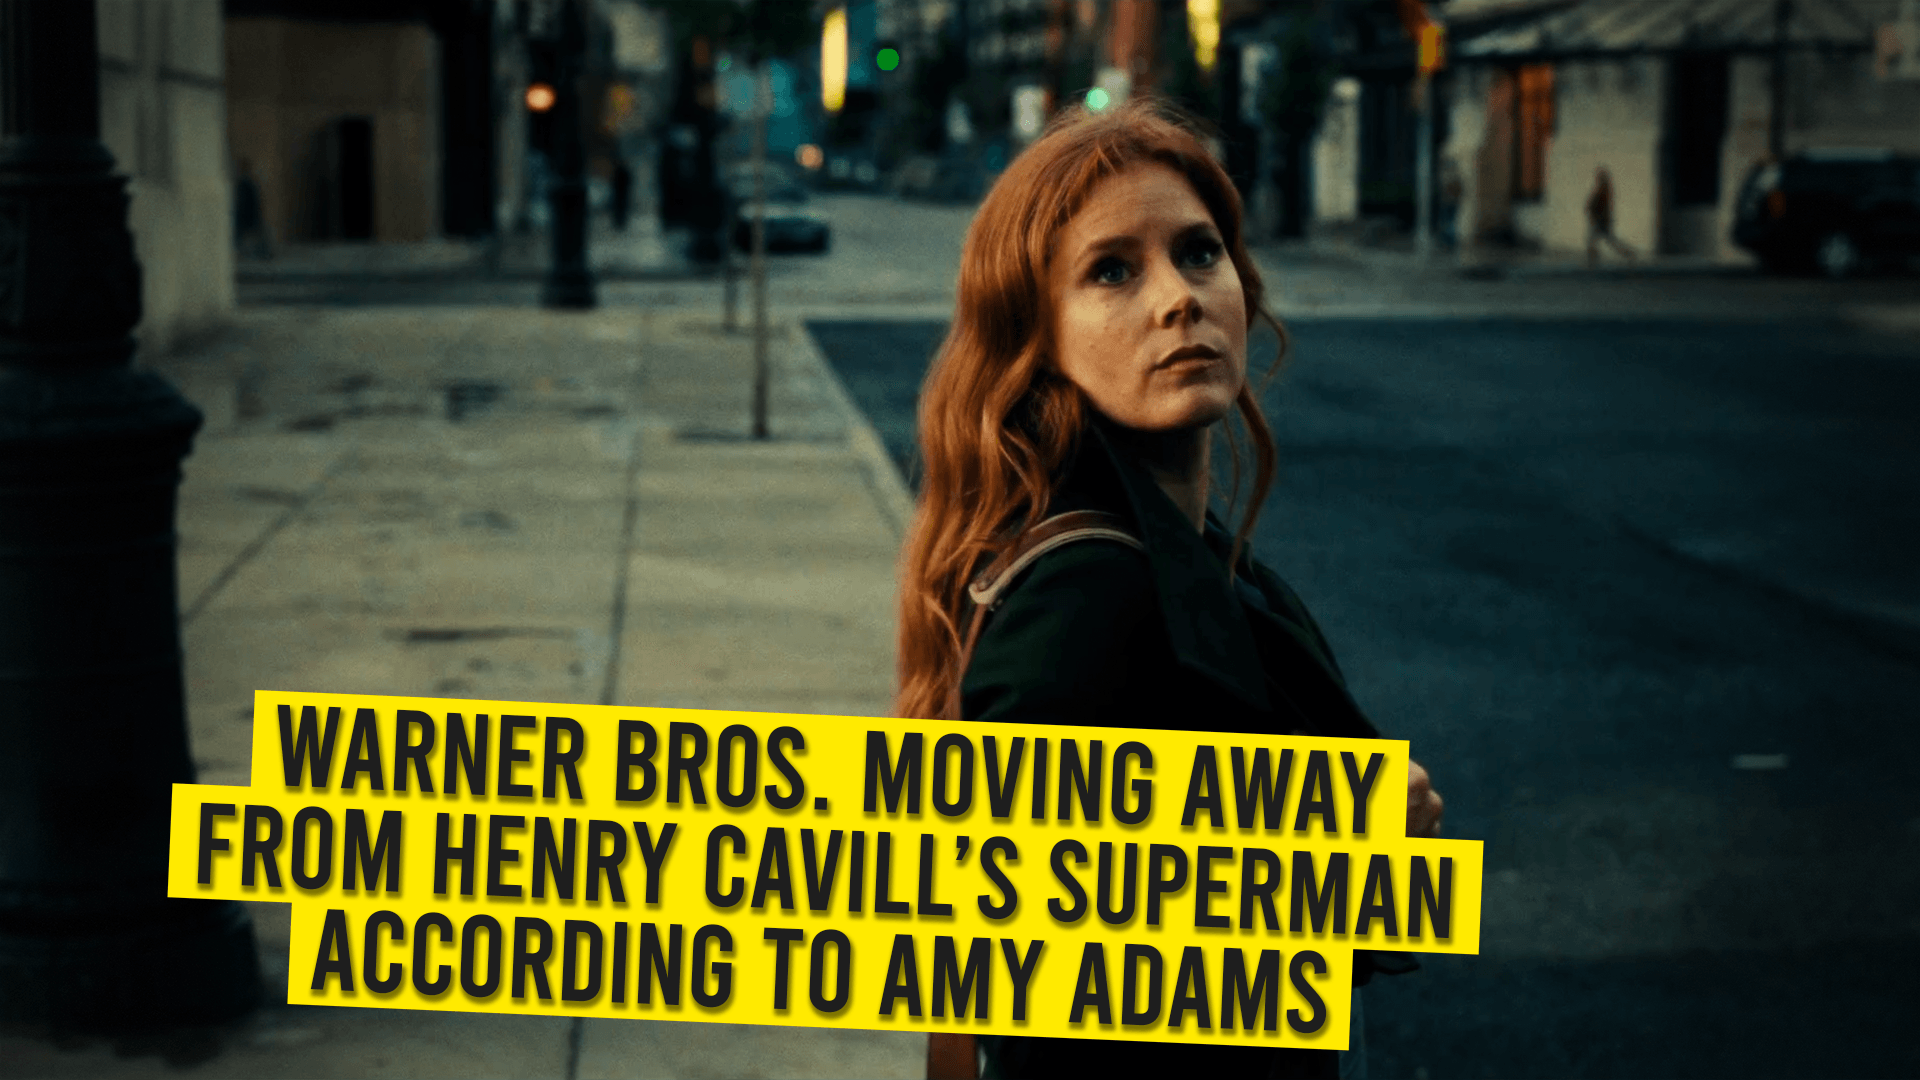 Warner Bros. Moving Away From Henry Cavill’s Superman According To Amy Adams.